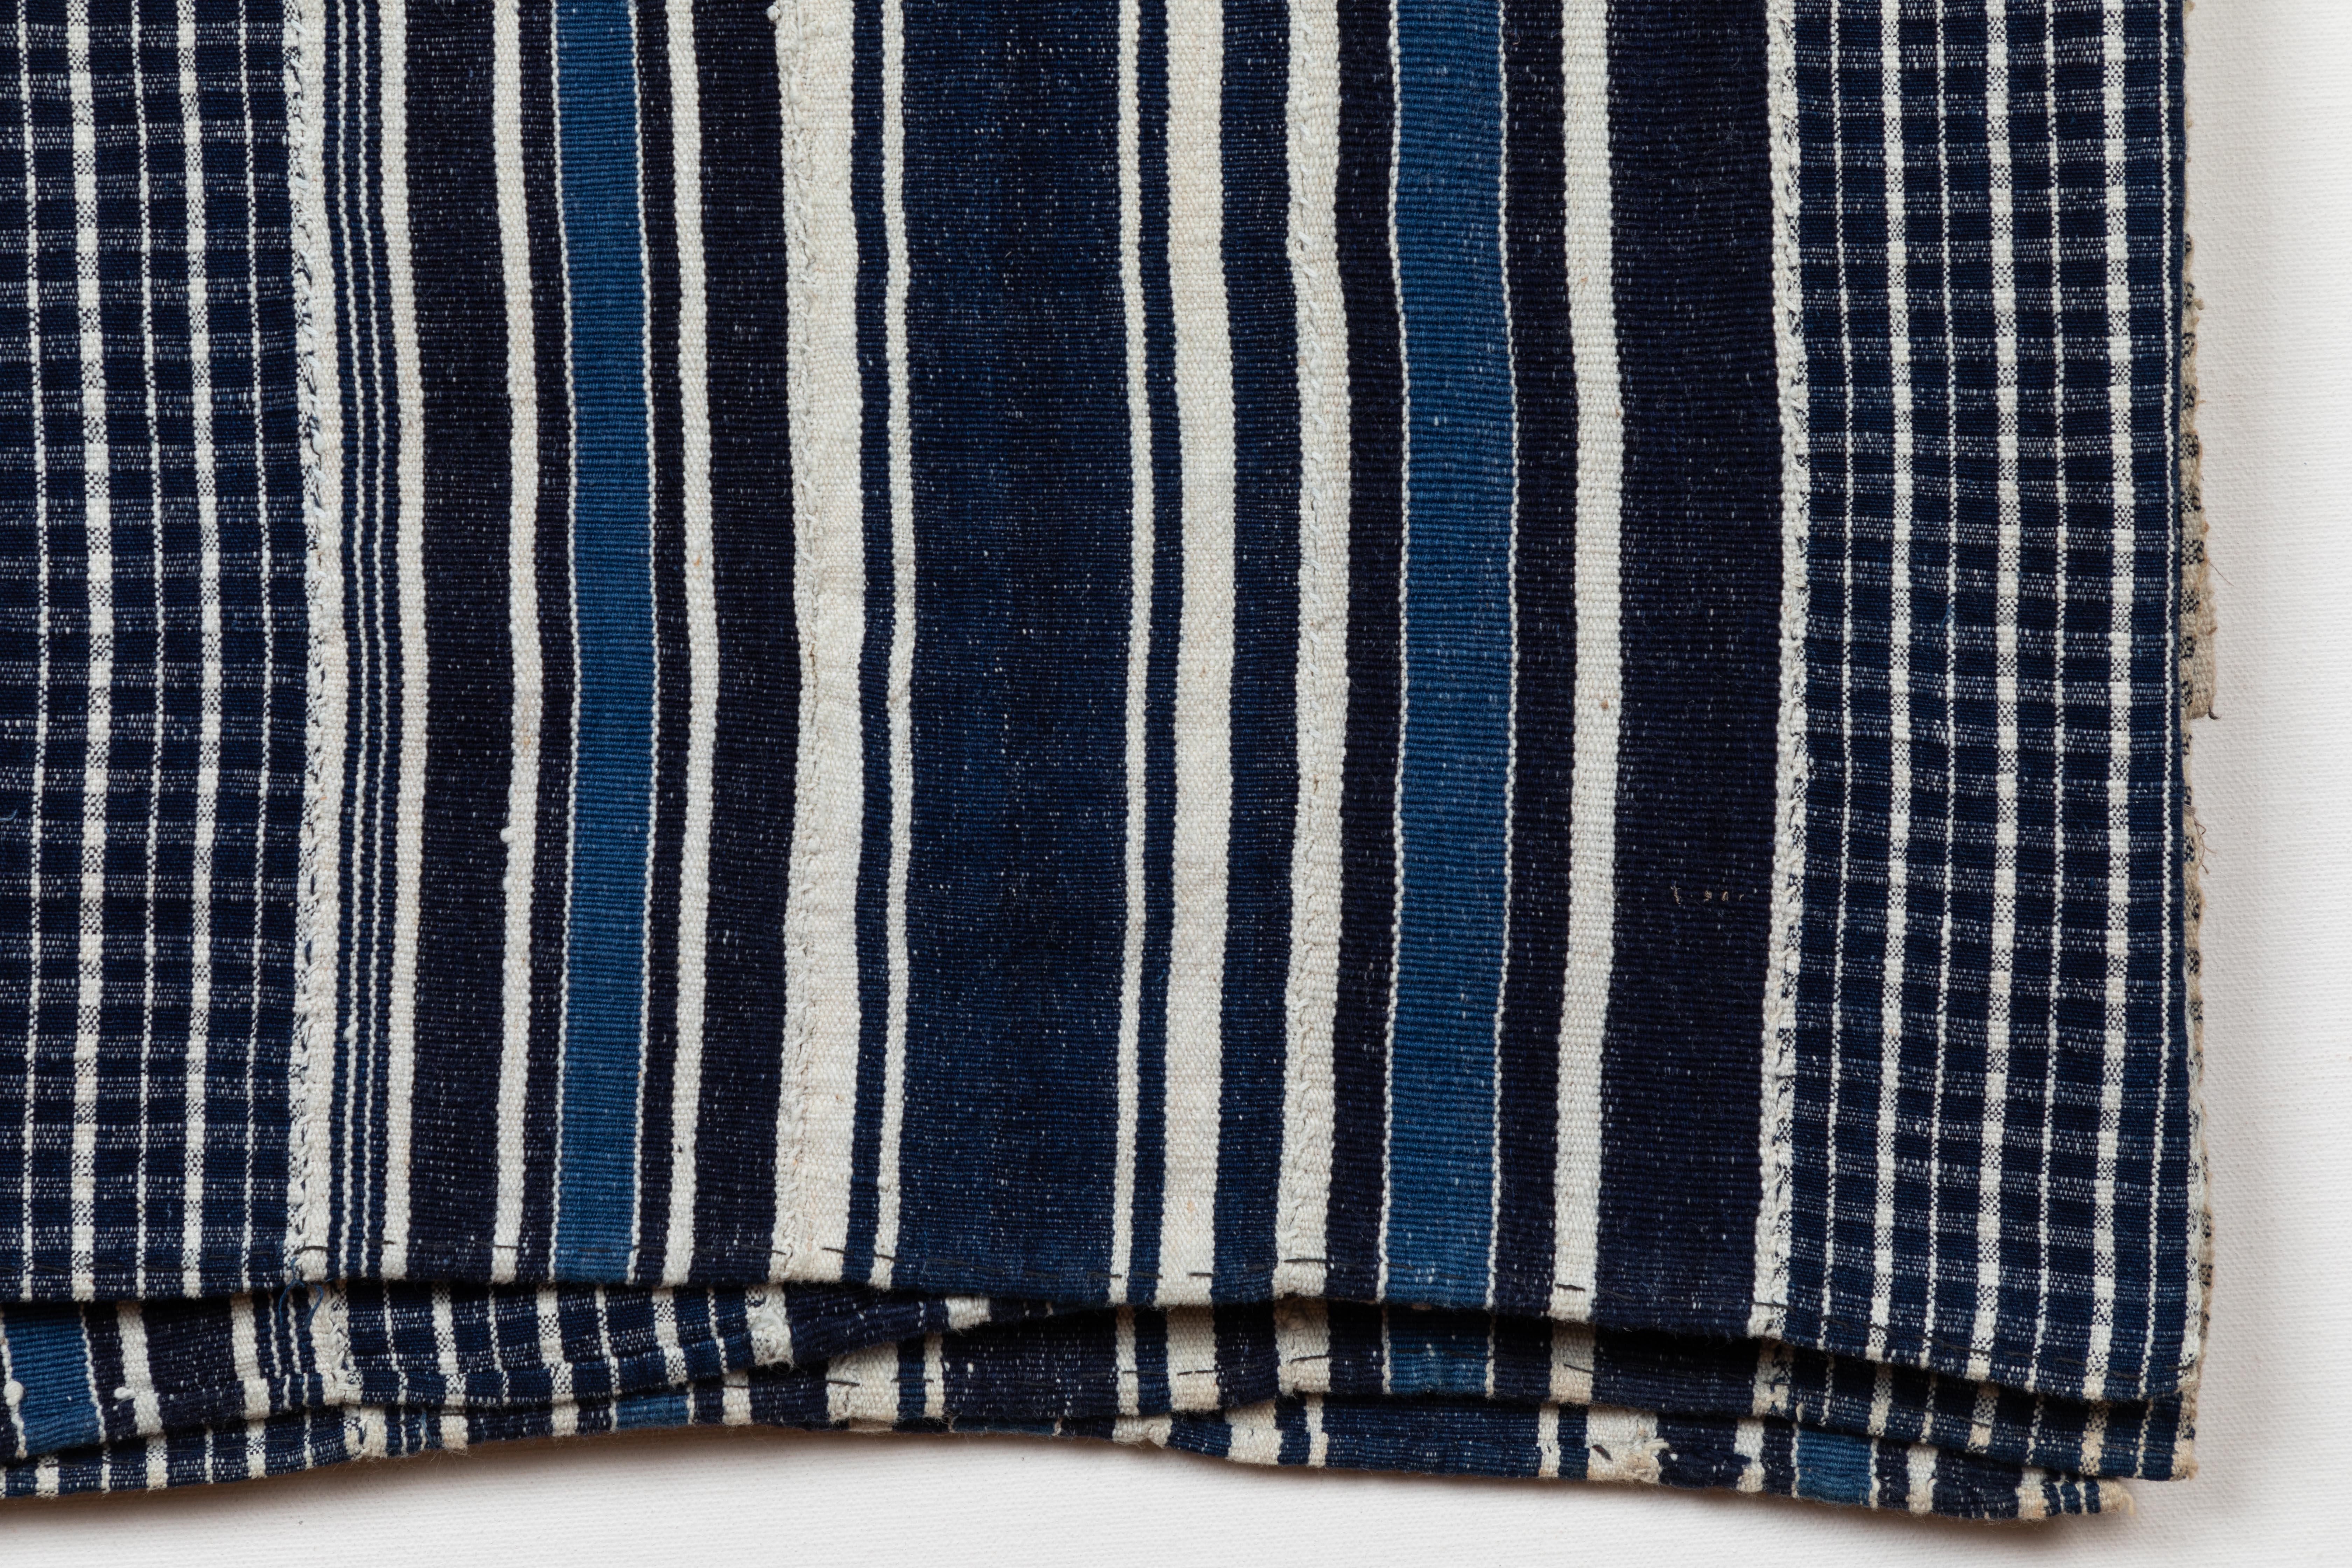 Natural dye indigo cotton handwoven textile. Woven in narrow, 3 inch strips and hand-sewn together. From Mali or Burkina Faso, West Africa.